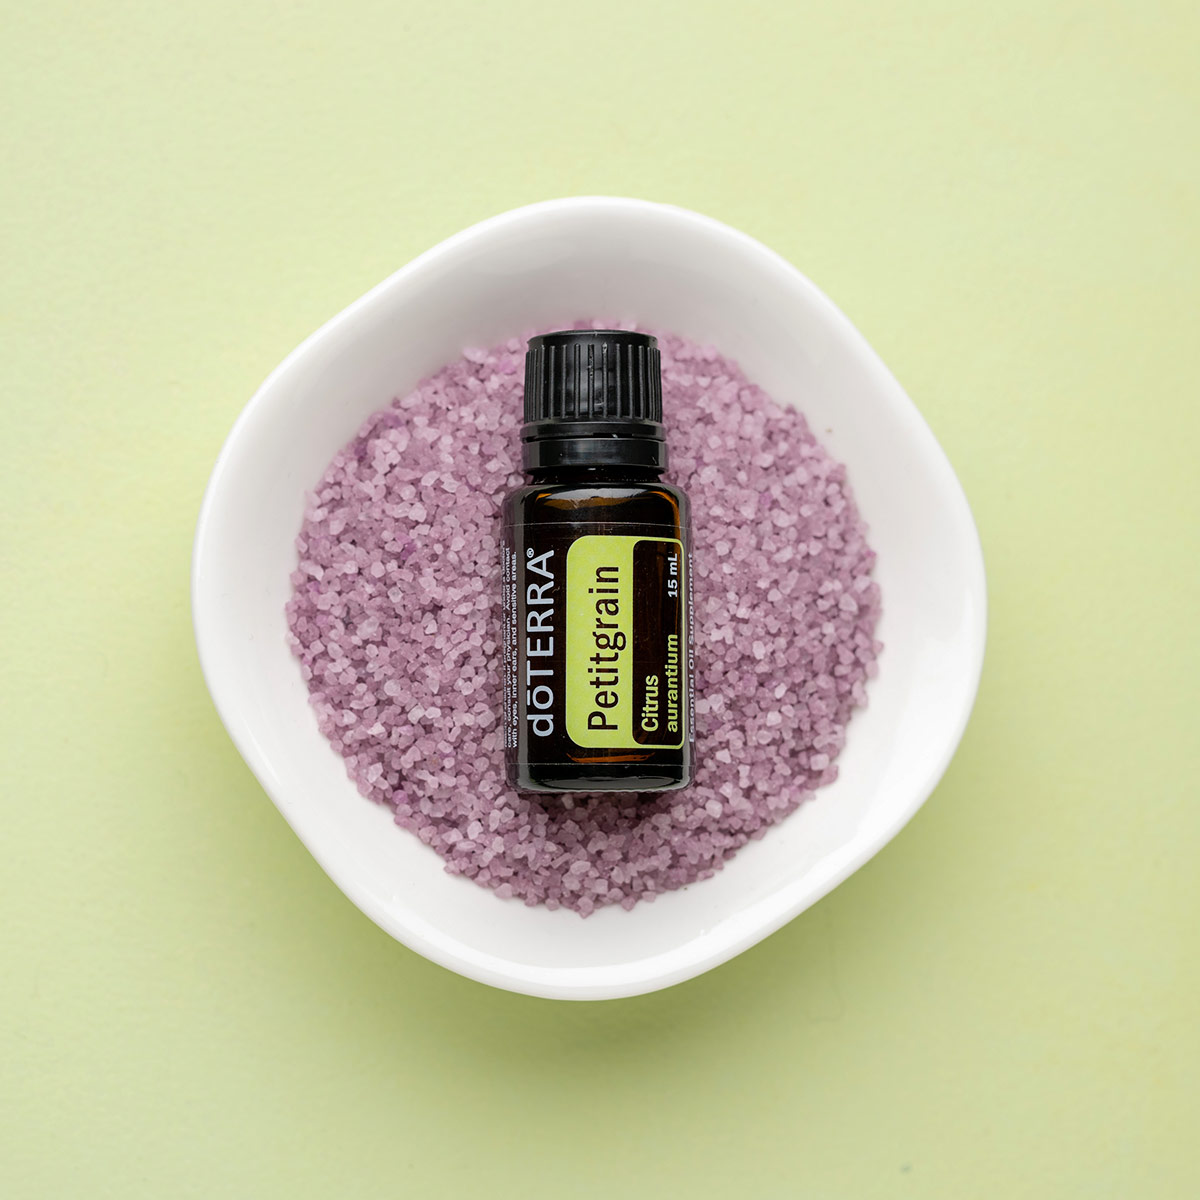 doTERRA Petitgrain essential oil bottle in a small white dish with purple bath salts. What does Petitgrain oil smell like? Petitgrain essential oil has a clean, fresh, floral aroma.